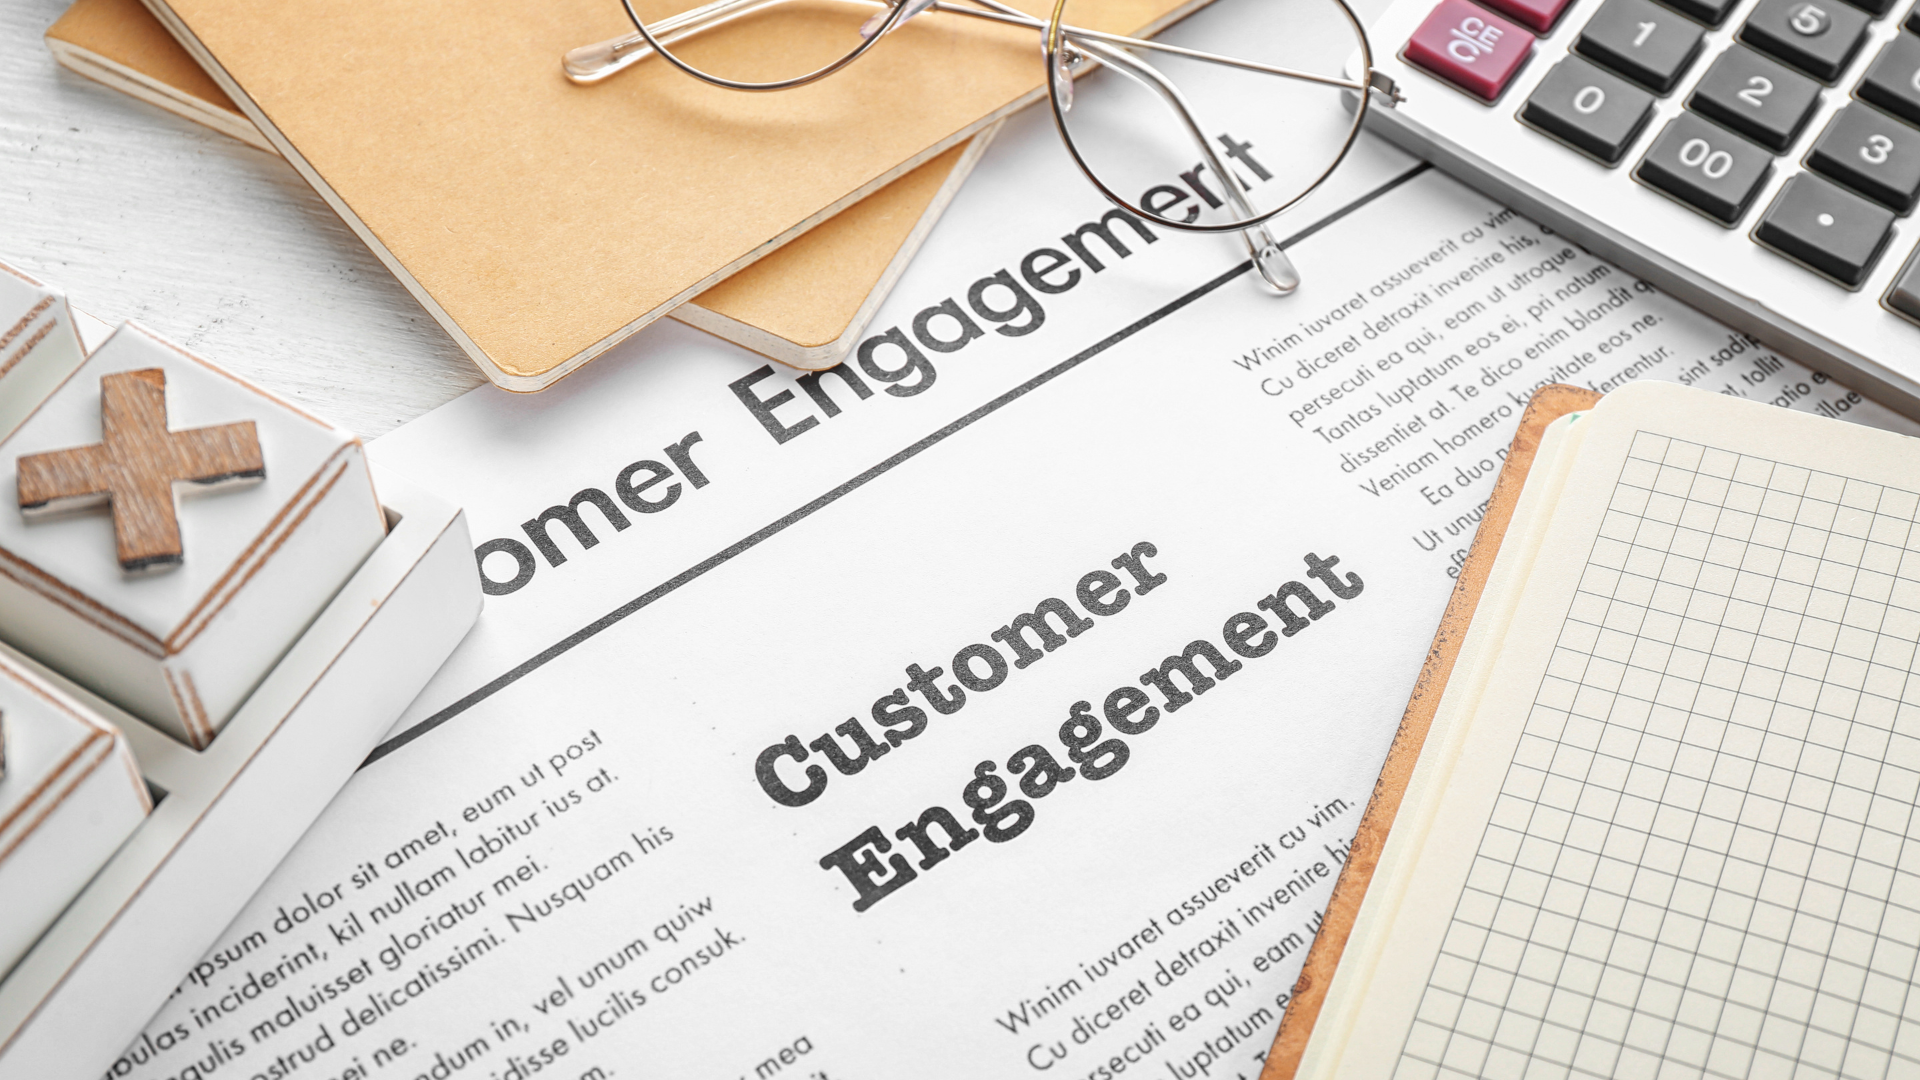 How To Use Social Media To Engage Customers